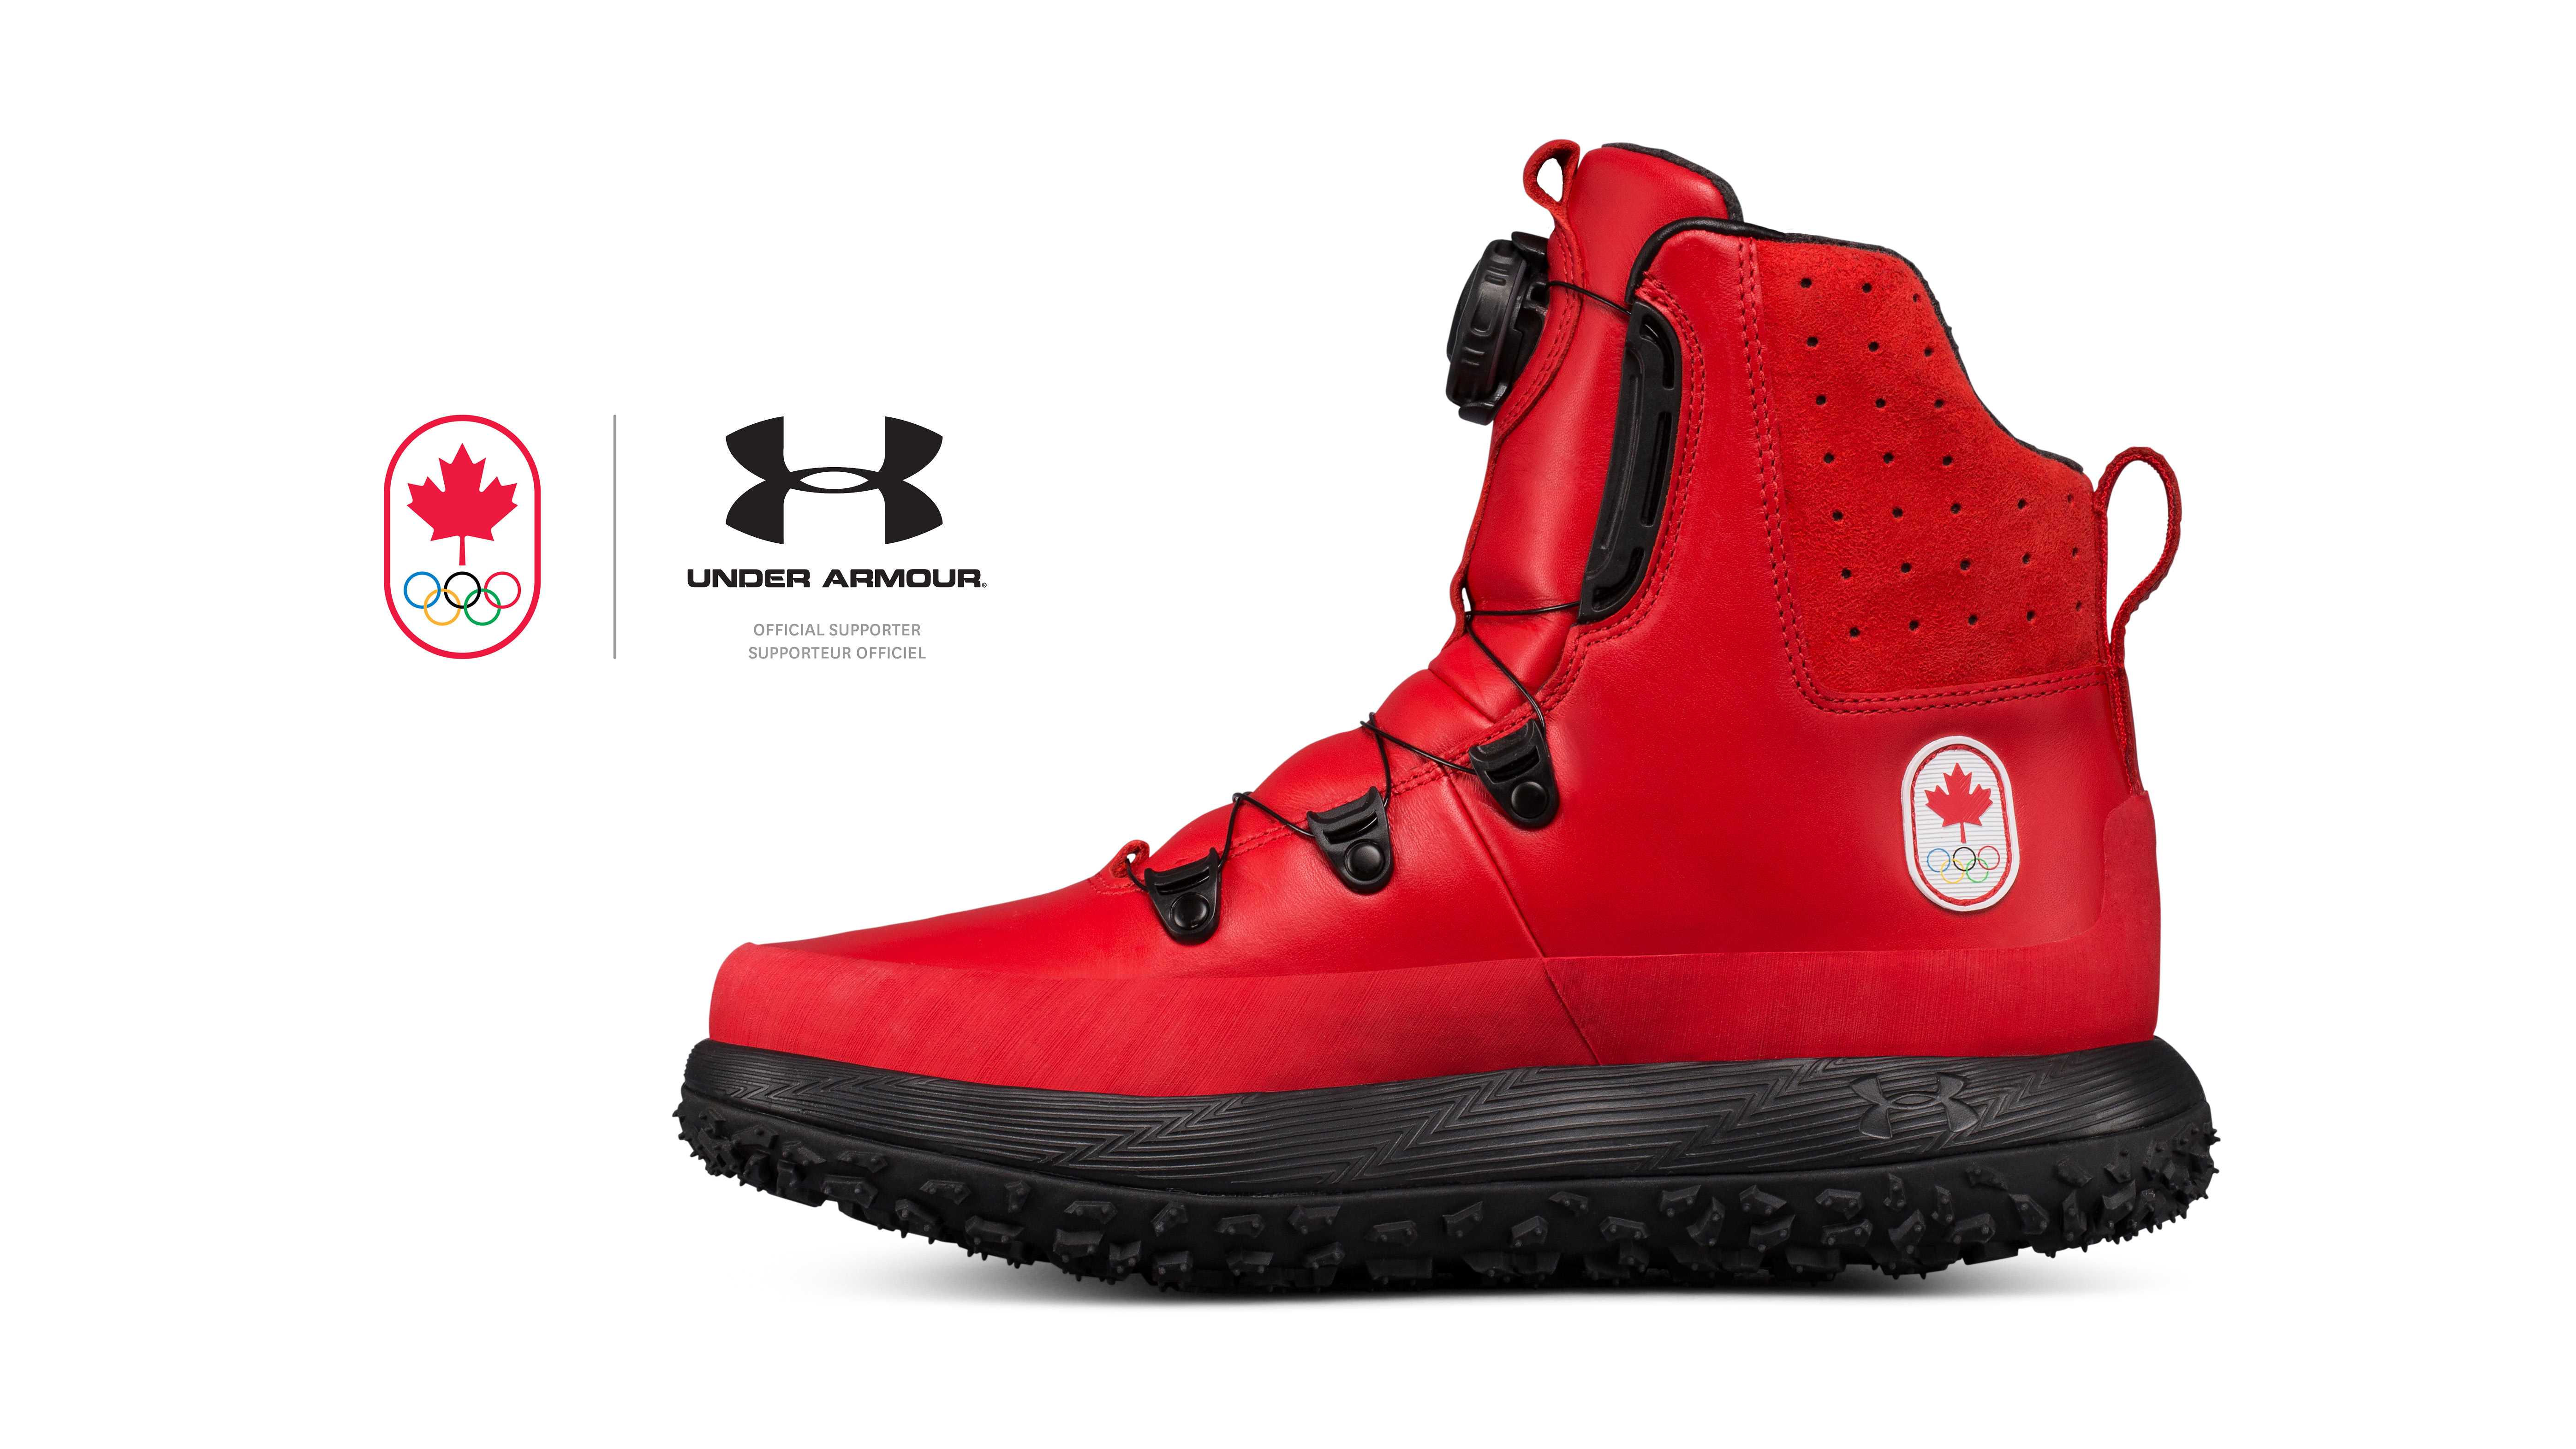 Under Armour joins Team Canada as official footwear supplier - Team Canada  - Official Olympic Team Website